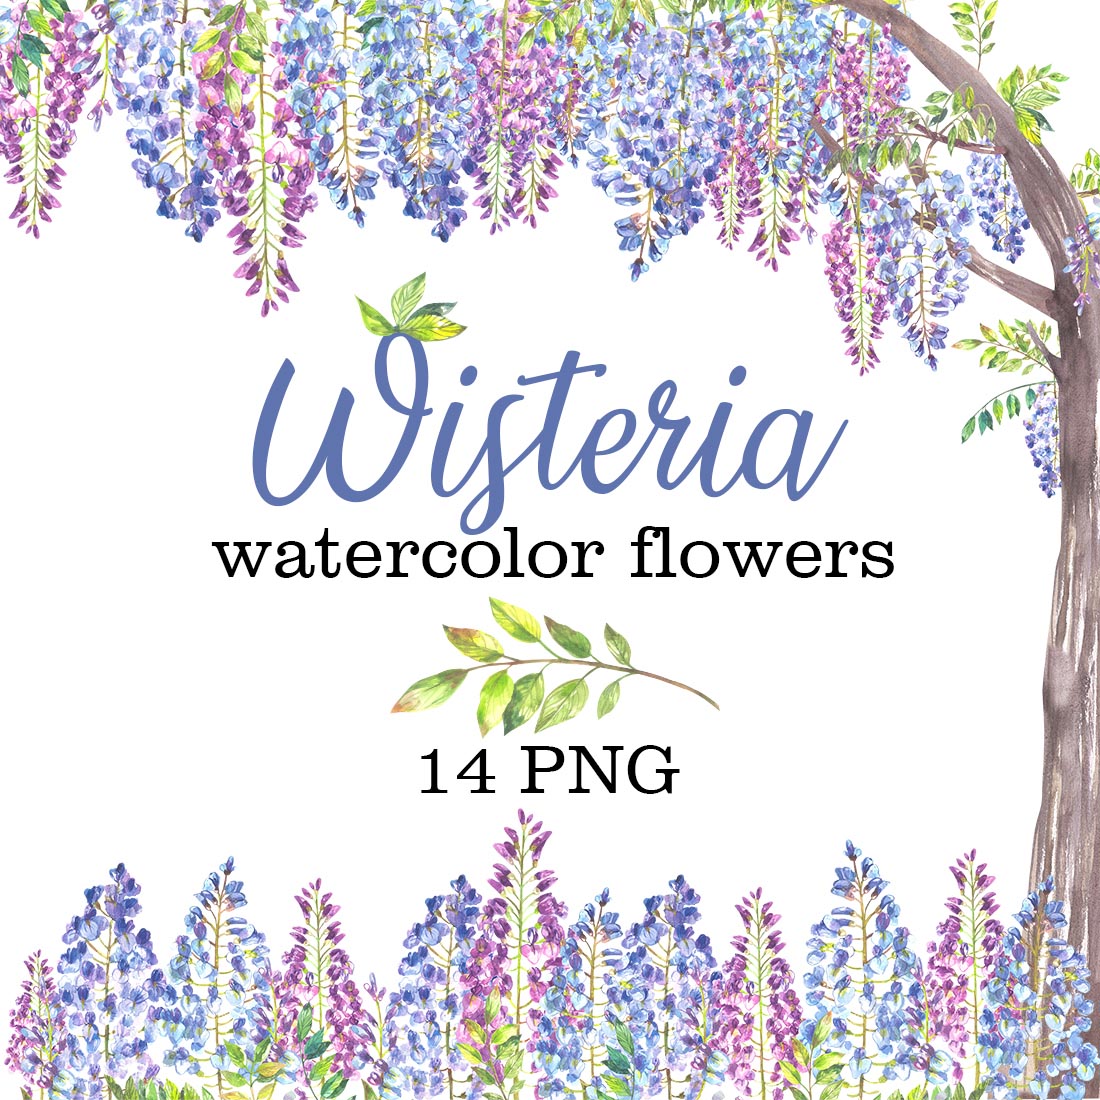 Wisteria Watercolor Flowers Illustration Preview Image.